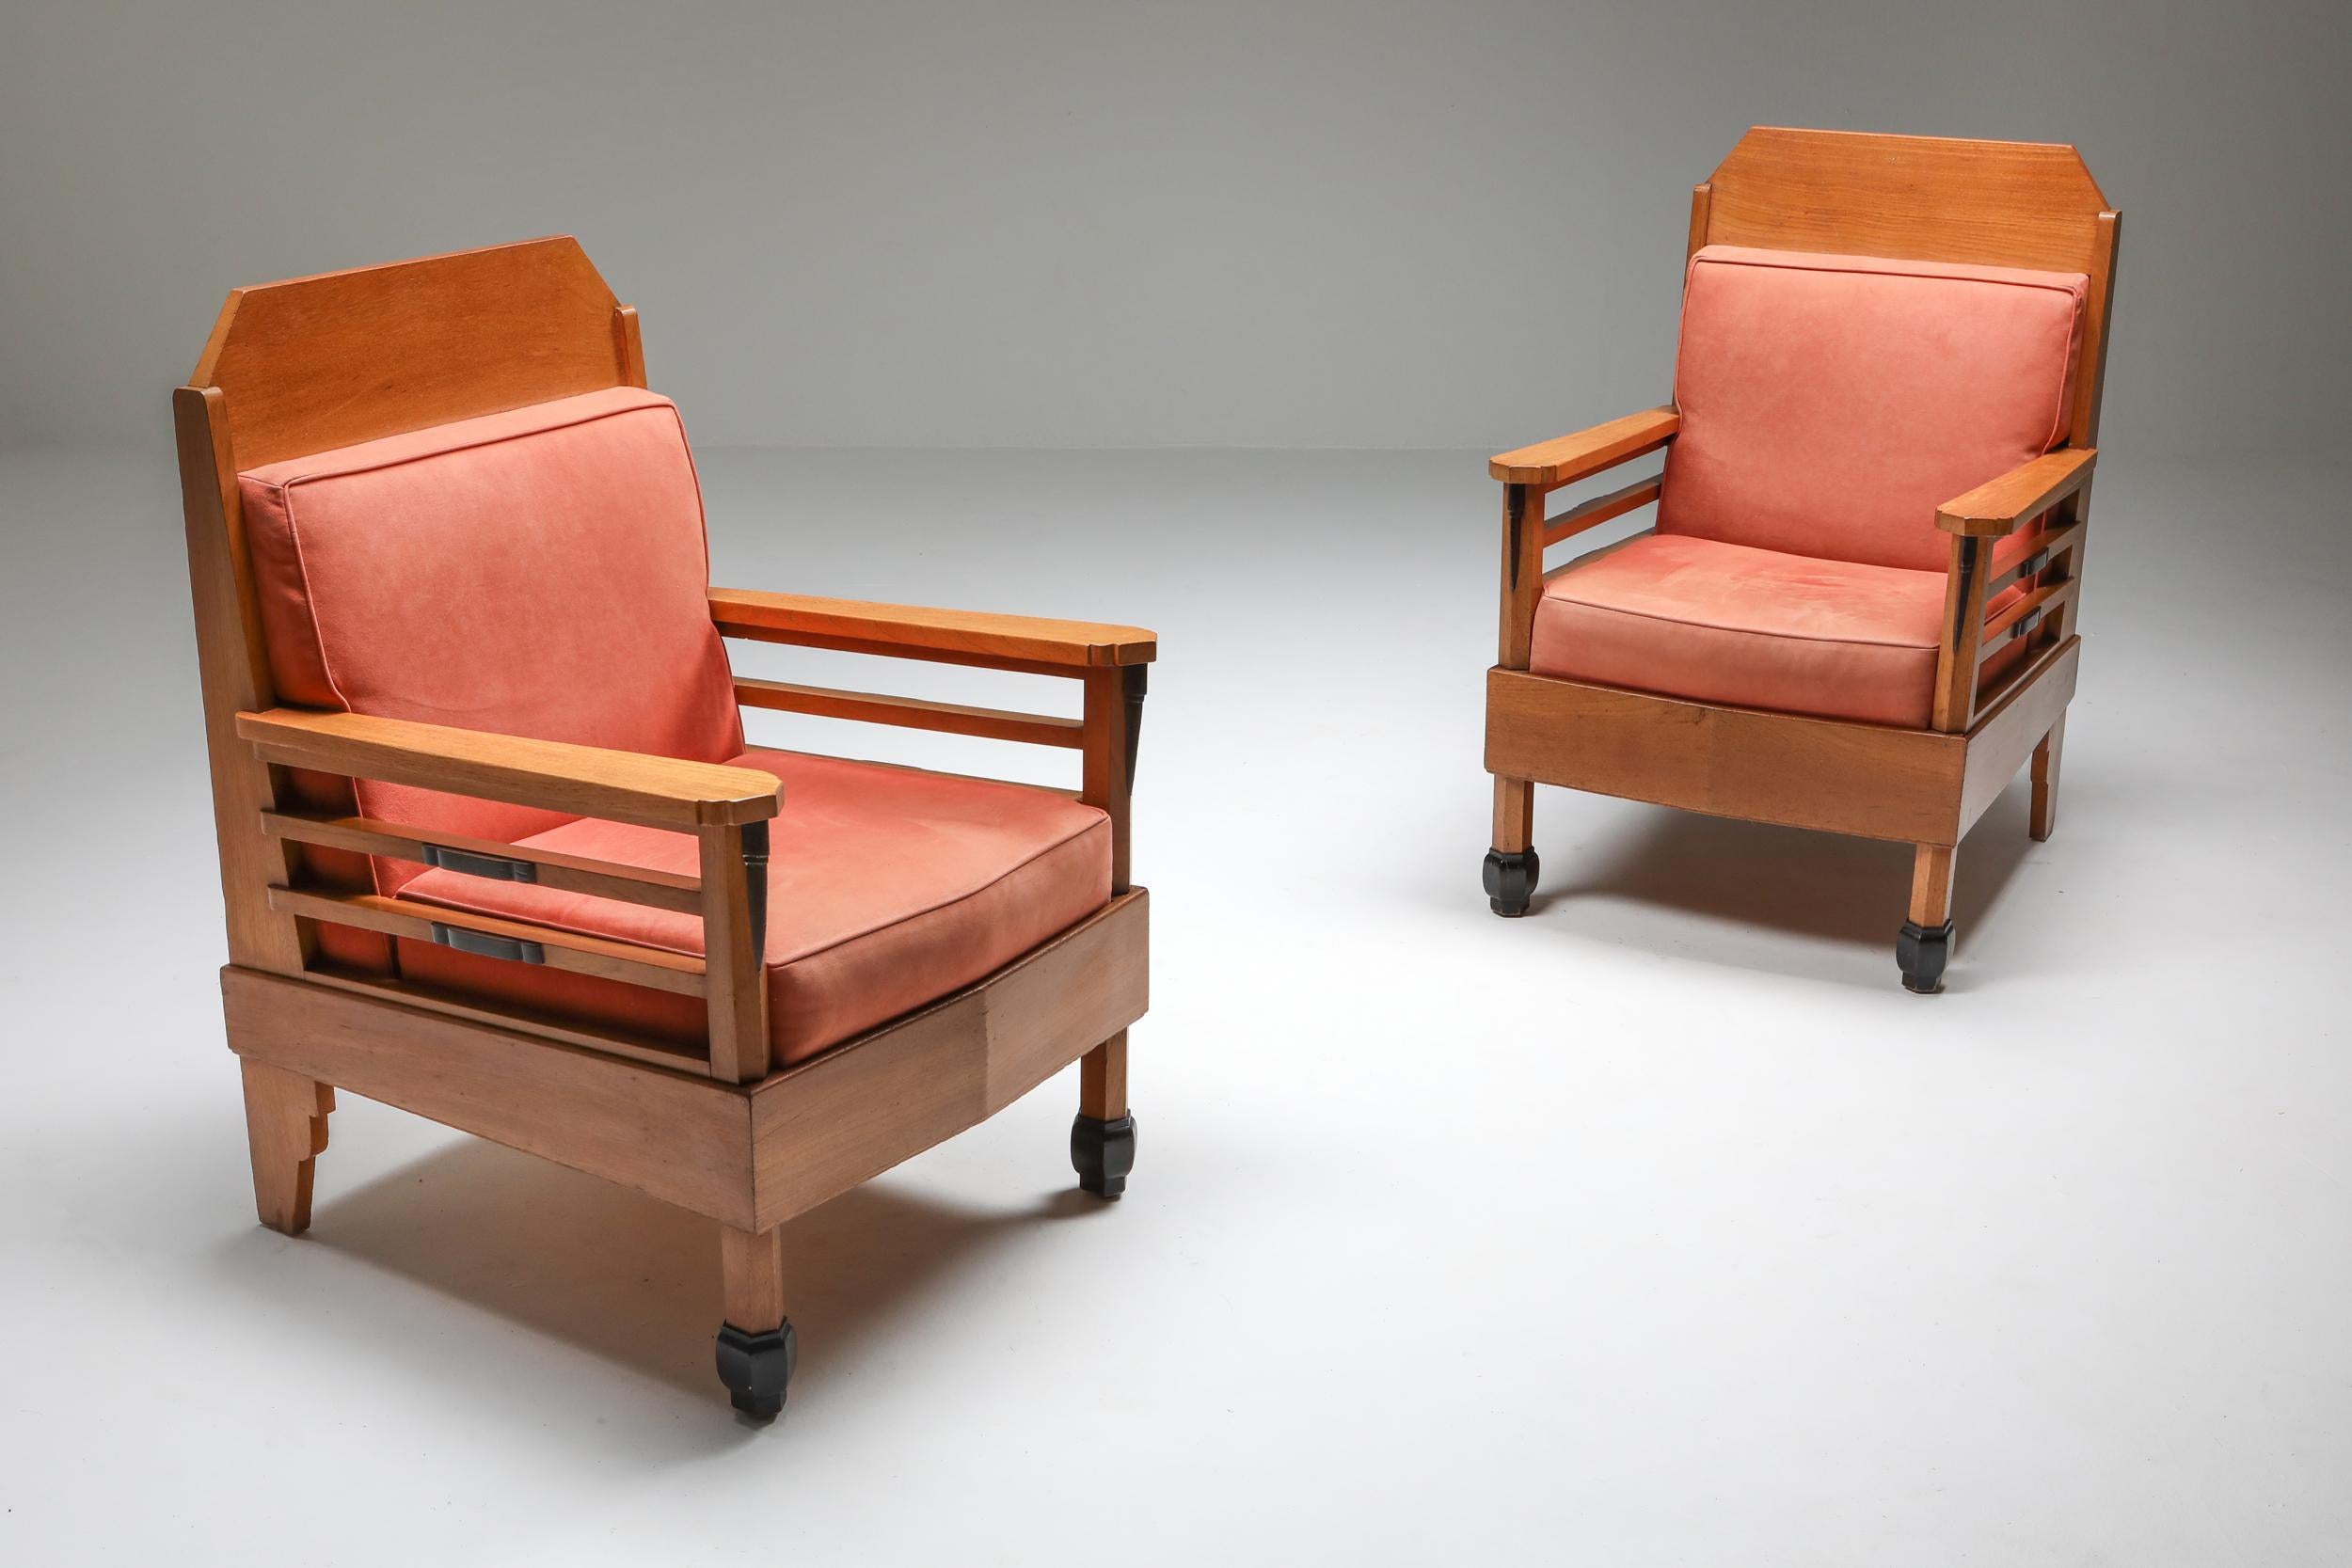 Pine and leather Art Deco armchairs, Europe, the 1960s.

These chairs are made with a solid pine frame with nice detailing. The seats are covered in their original pink leather, contrasting the frame. The combination of these materials forms a